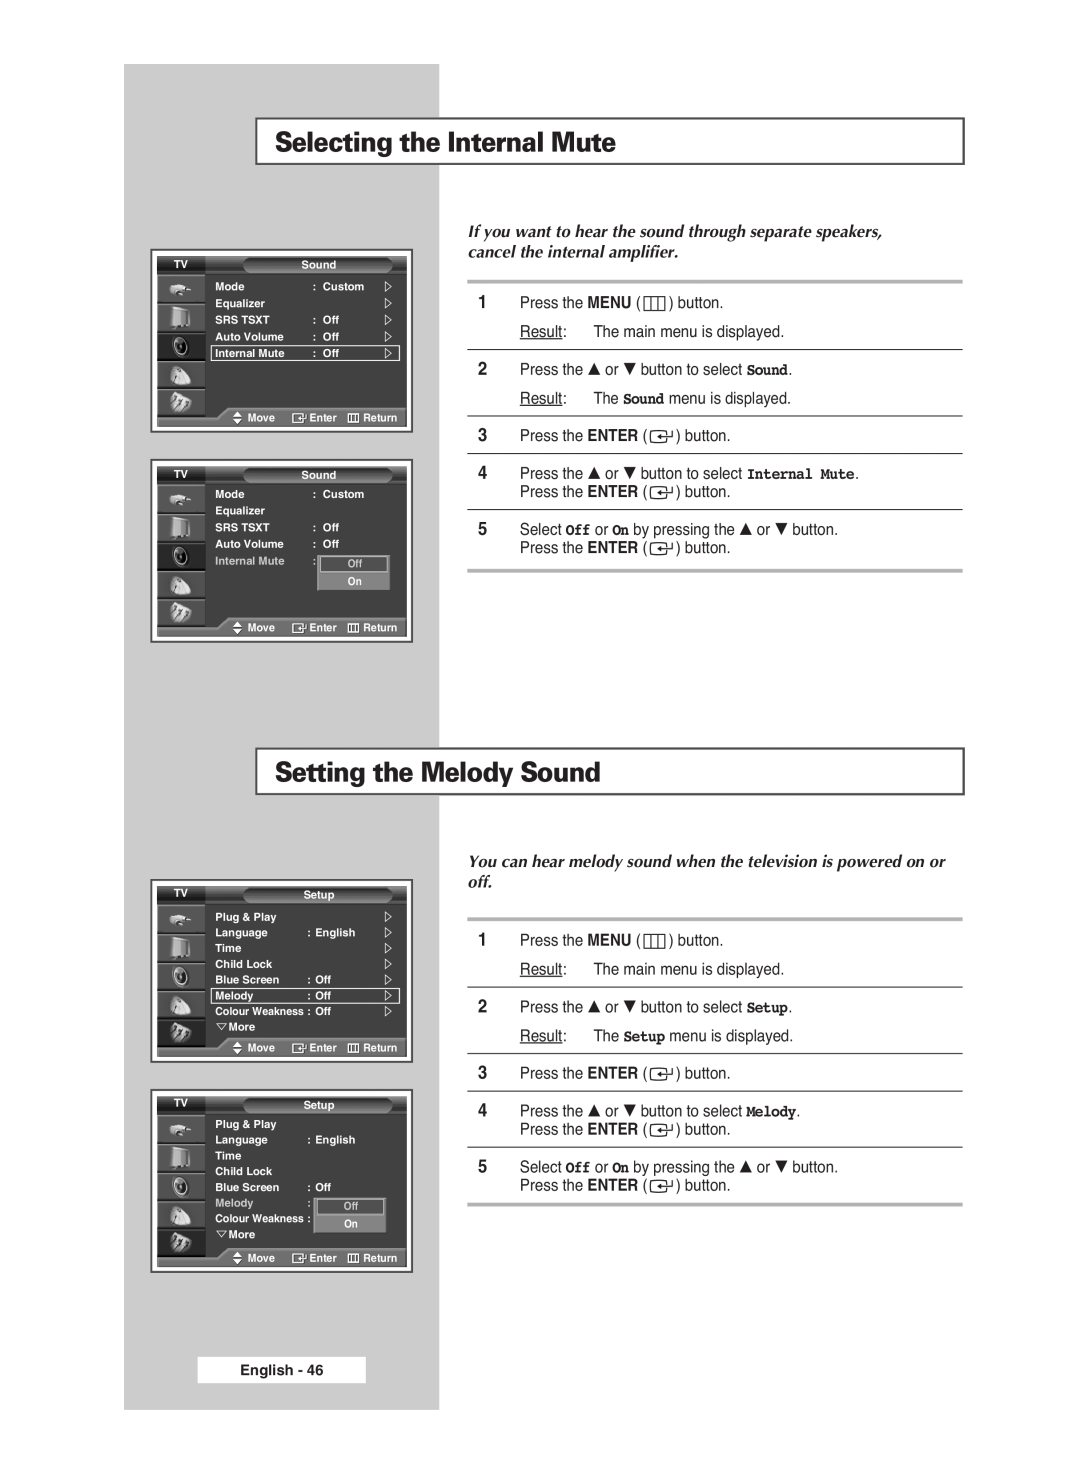 Samsung PS-42S5S manual Selecting the Internal Mute, Setting the Melody Sound 